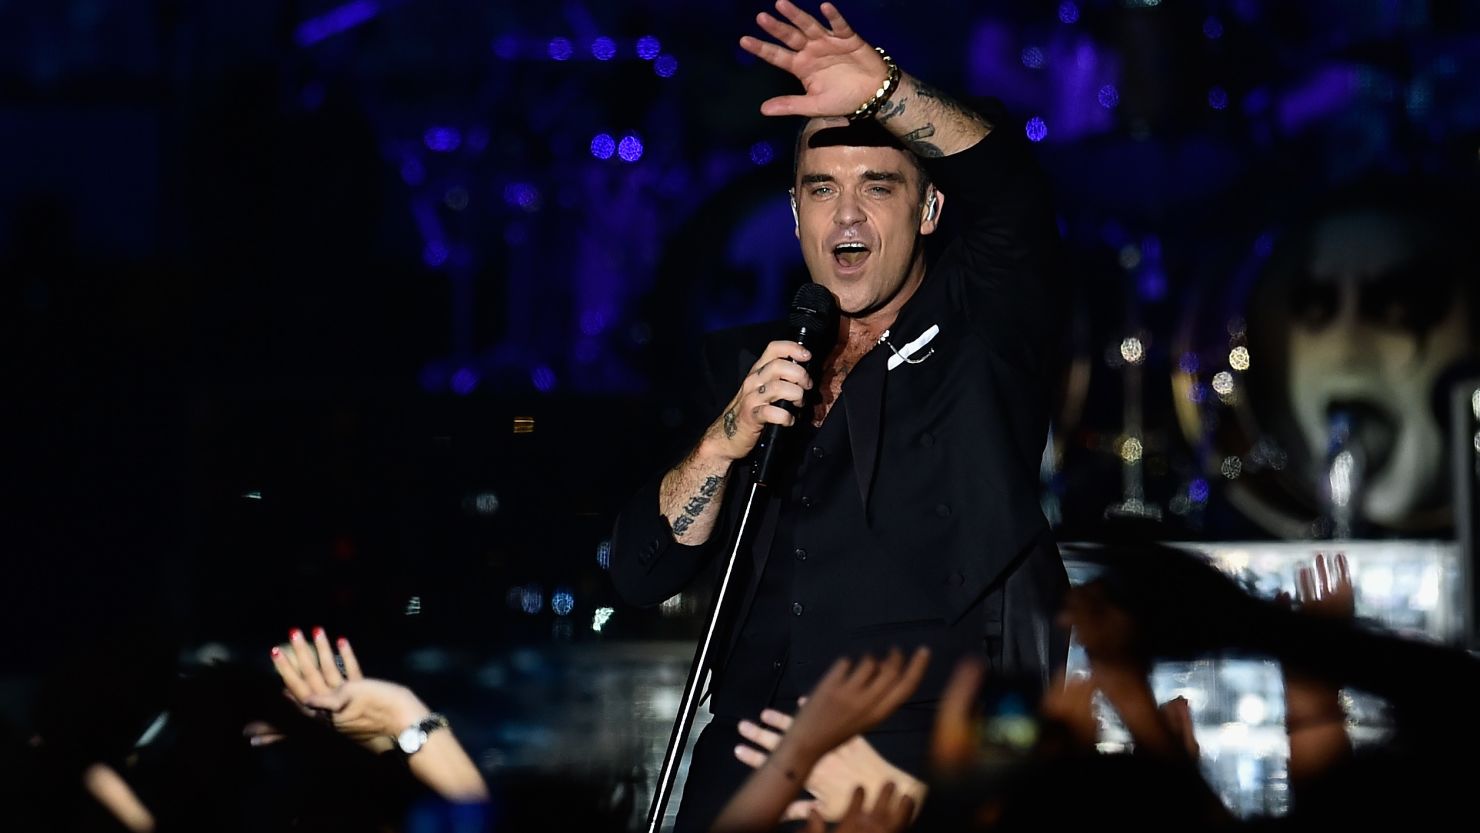 British singer Robbie Williams may have lost some fans in Russia with his latest track.